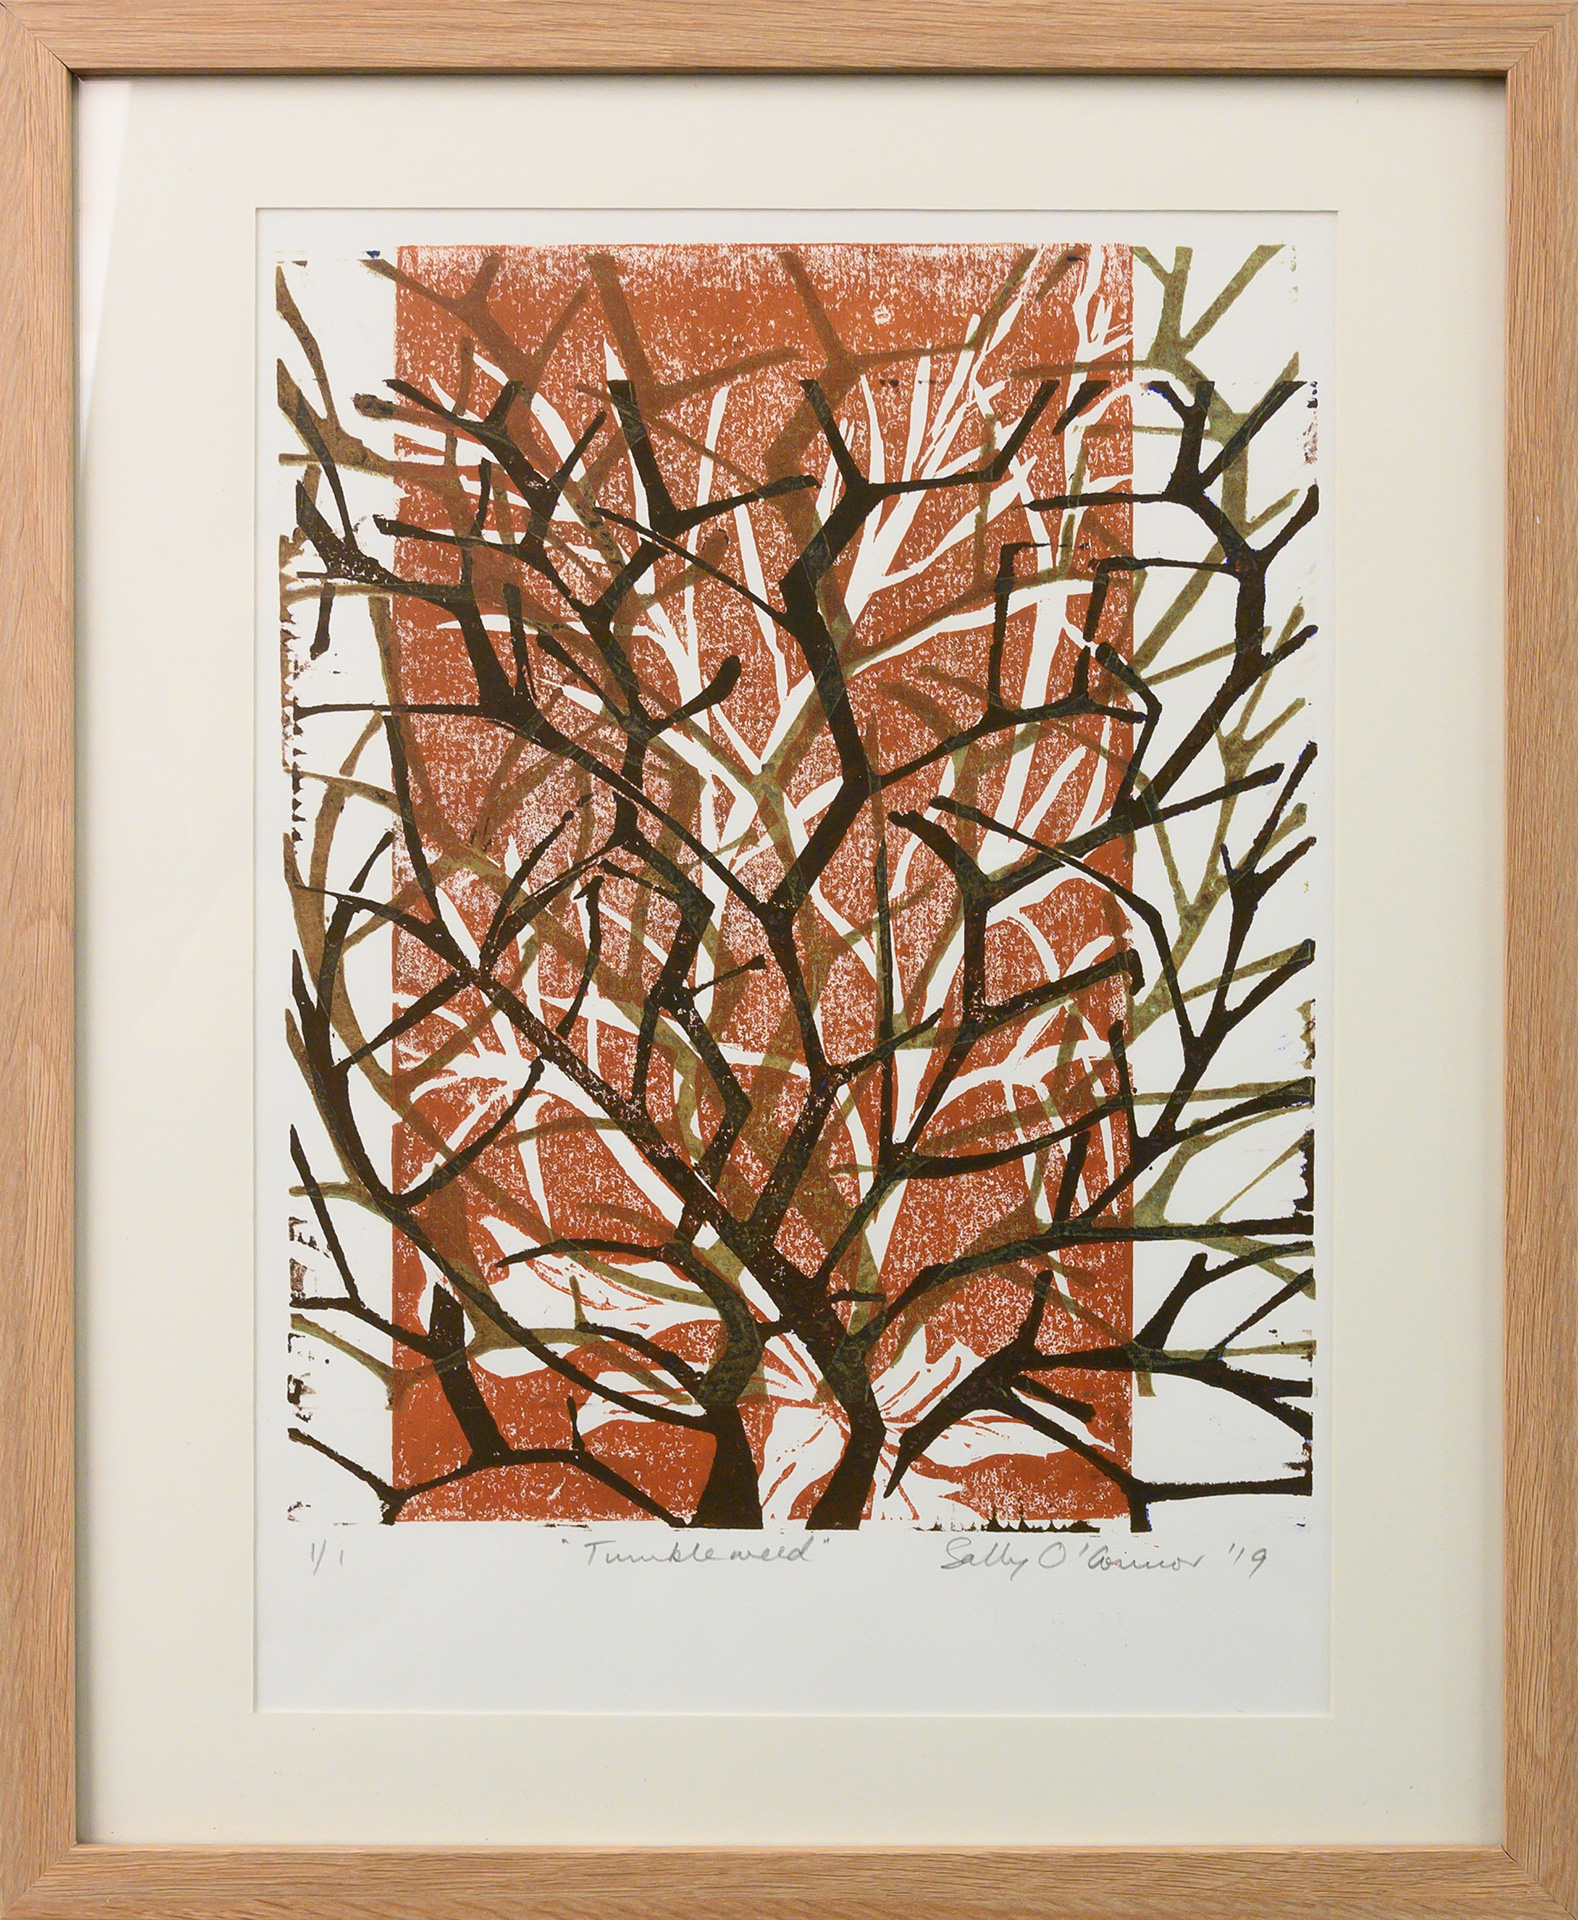 Framed artwork by Sally OConnor of layers of closeup tumbleweed branches in earthy tones